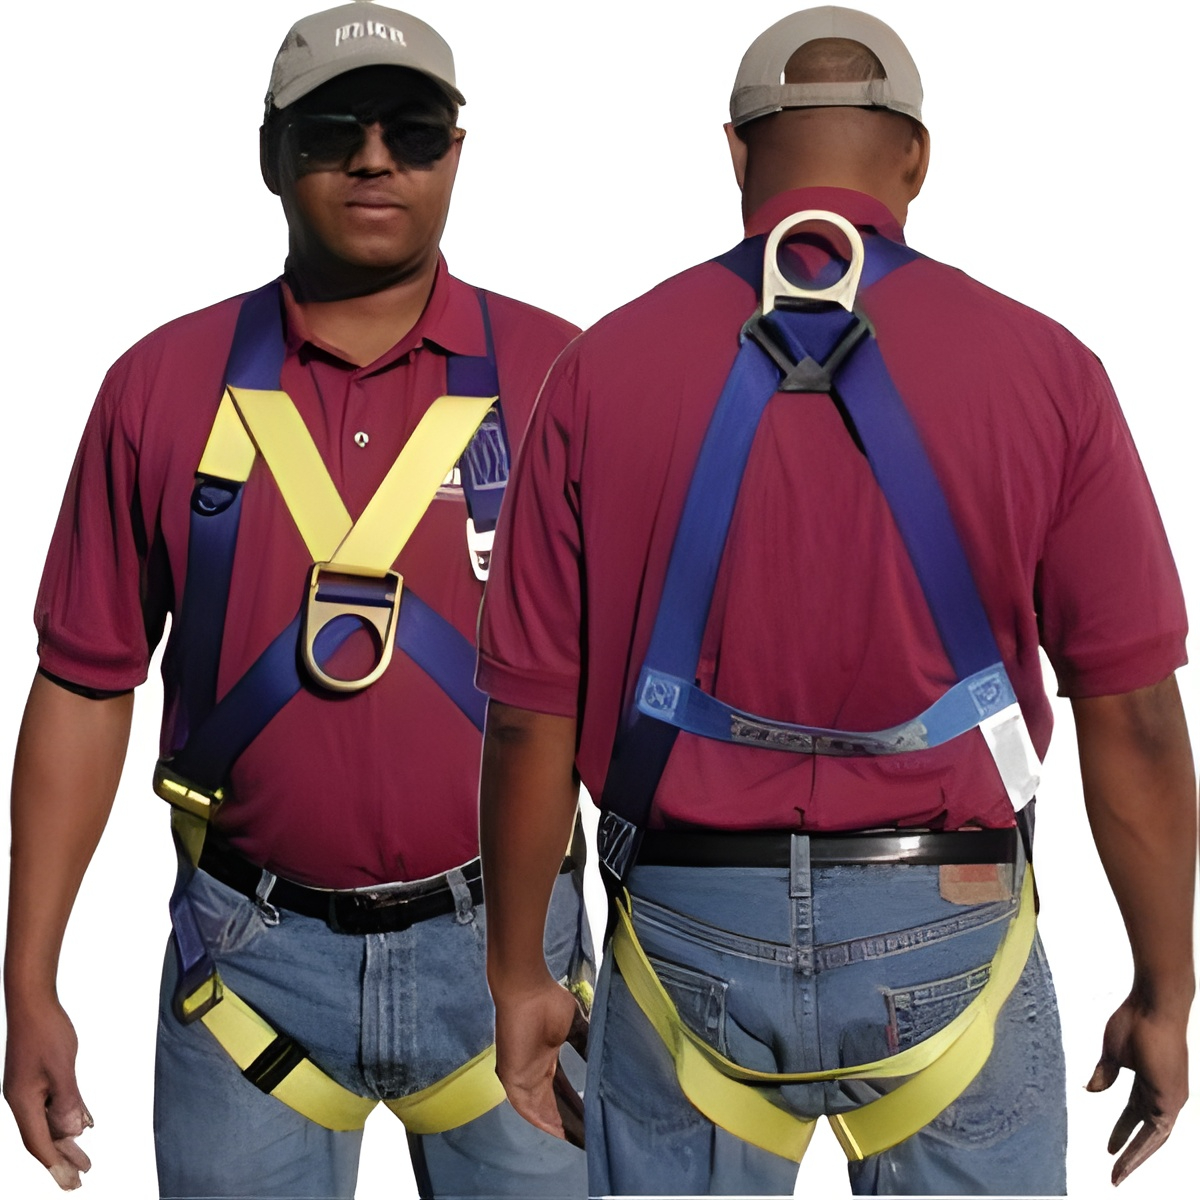 What size is the 933 Front and back D ring harness Gemtor